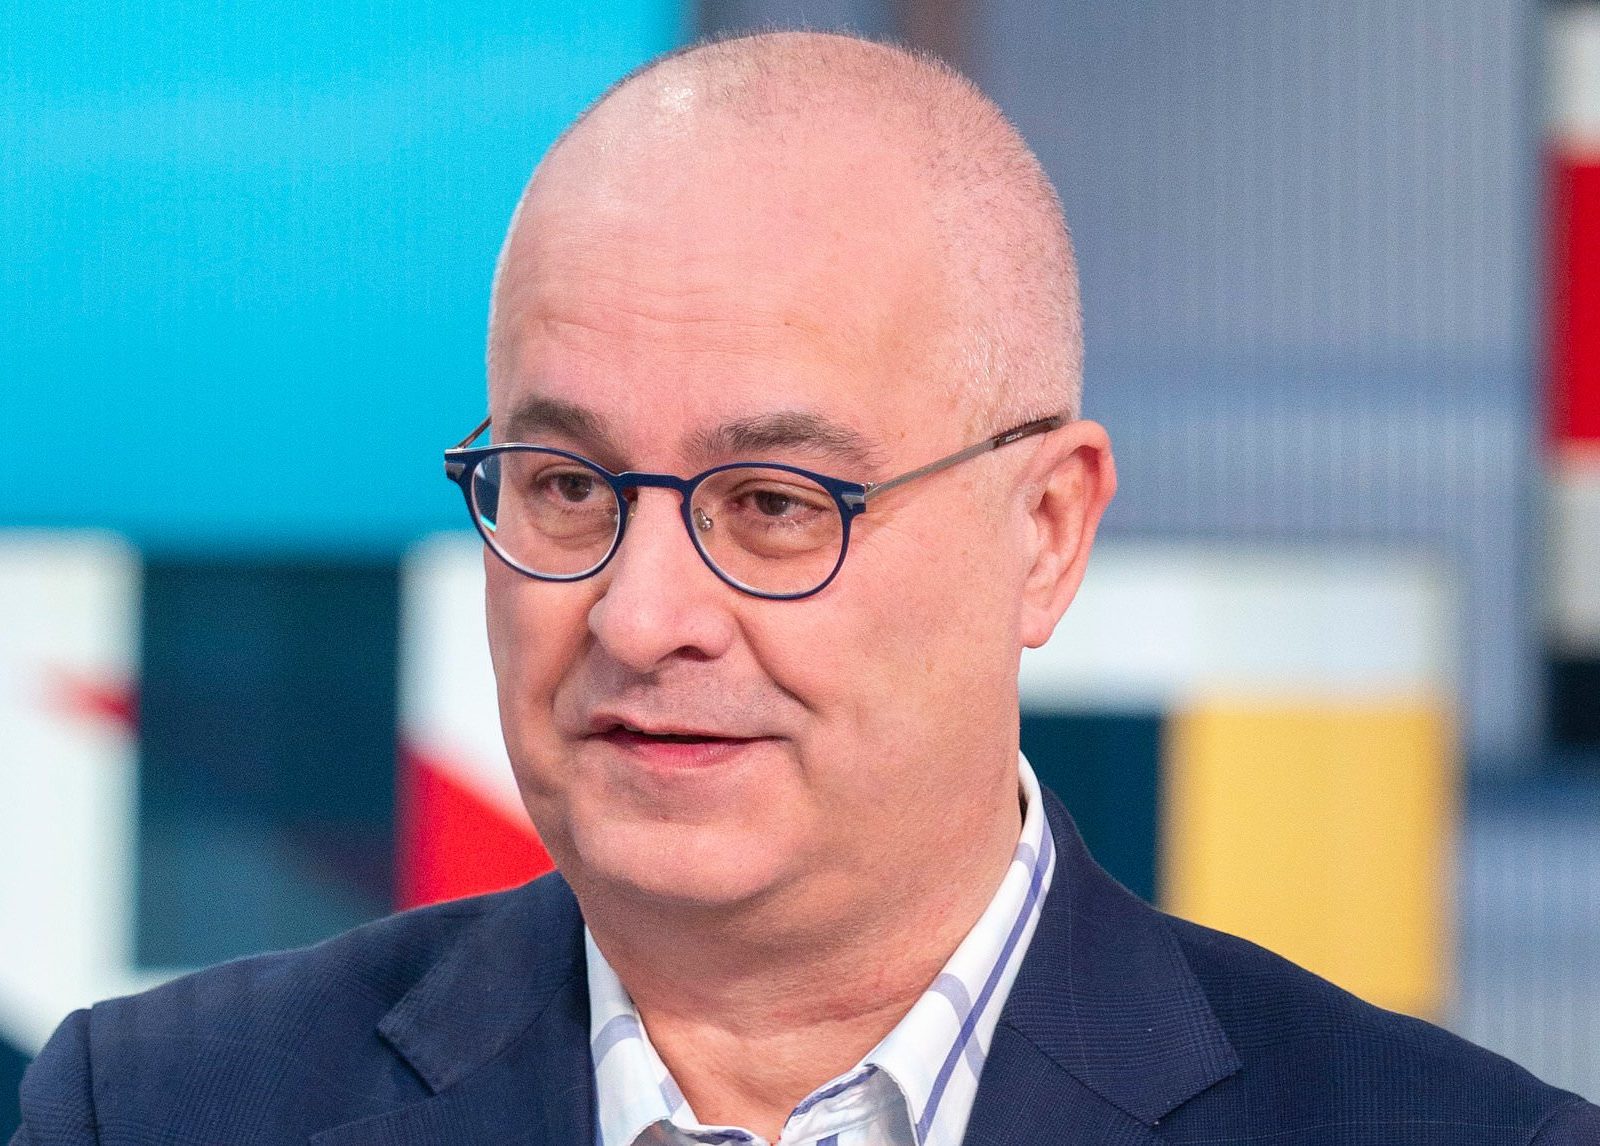 Iain Dale walked off the set of Good Morning Britain during a debate about social care and austerity measures